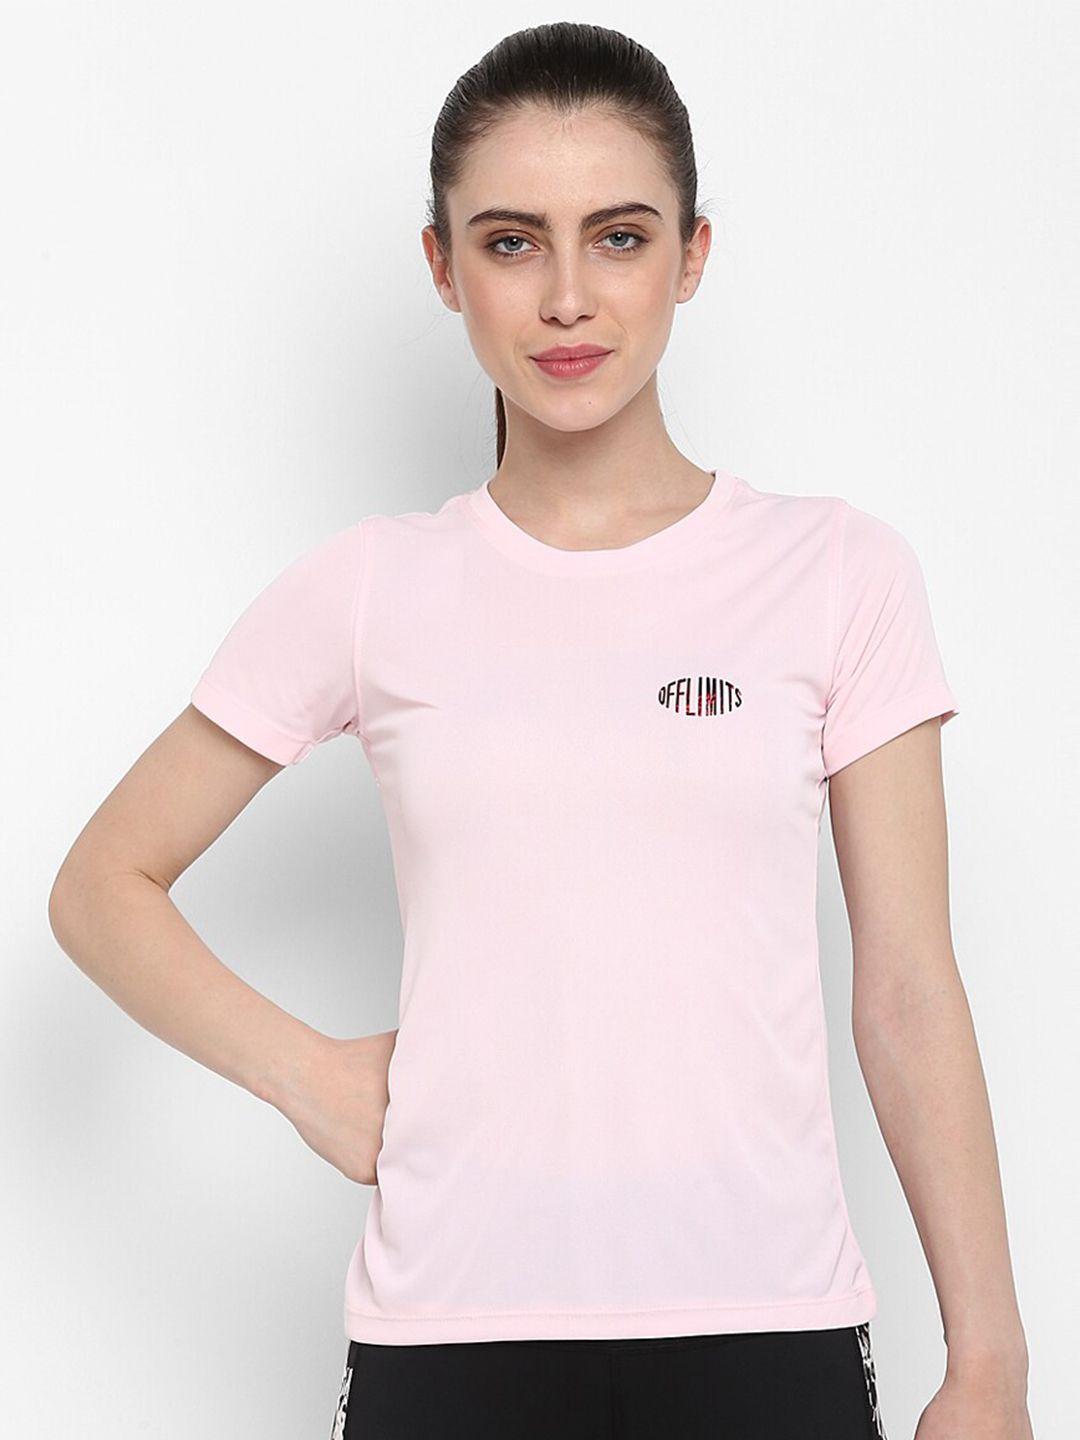 off limits antimicrobial round neck t-shirt